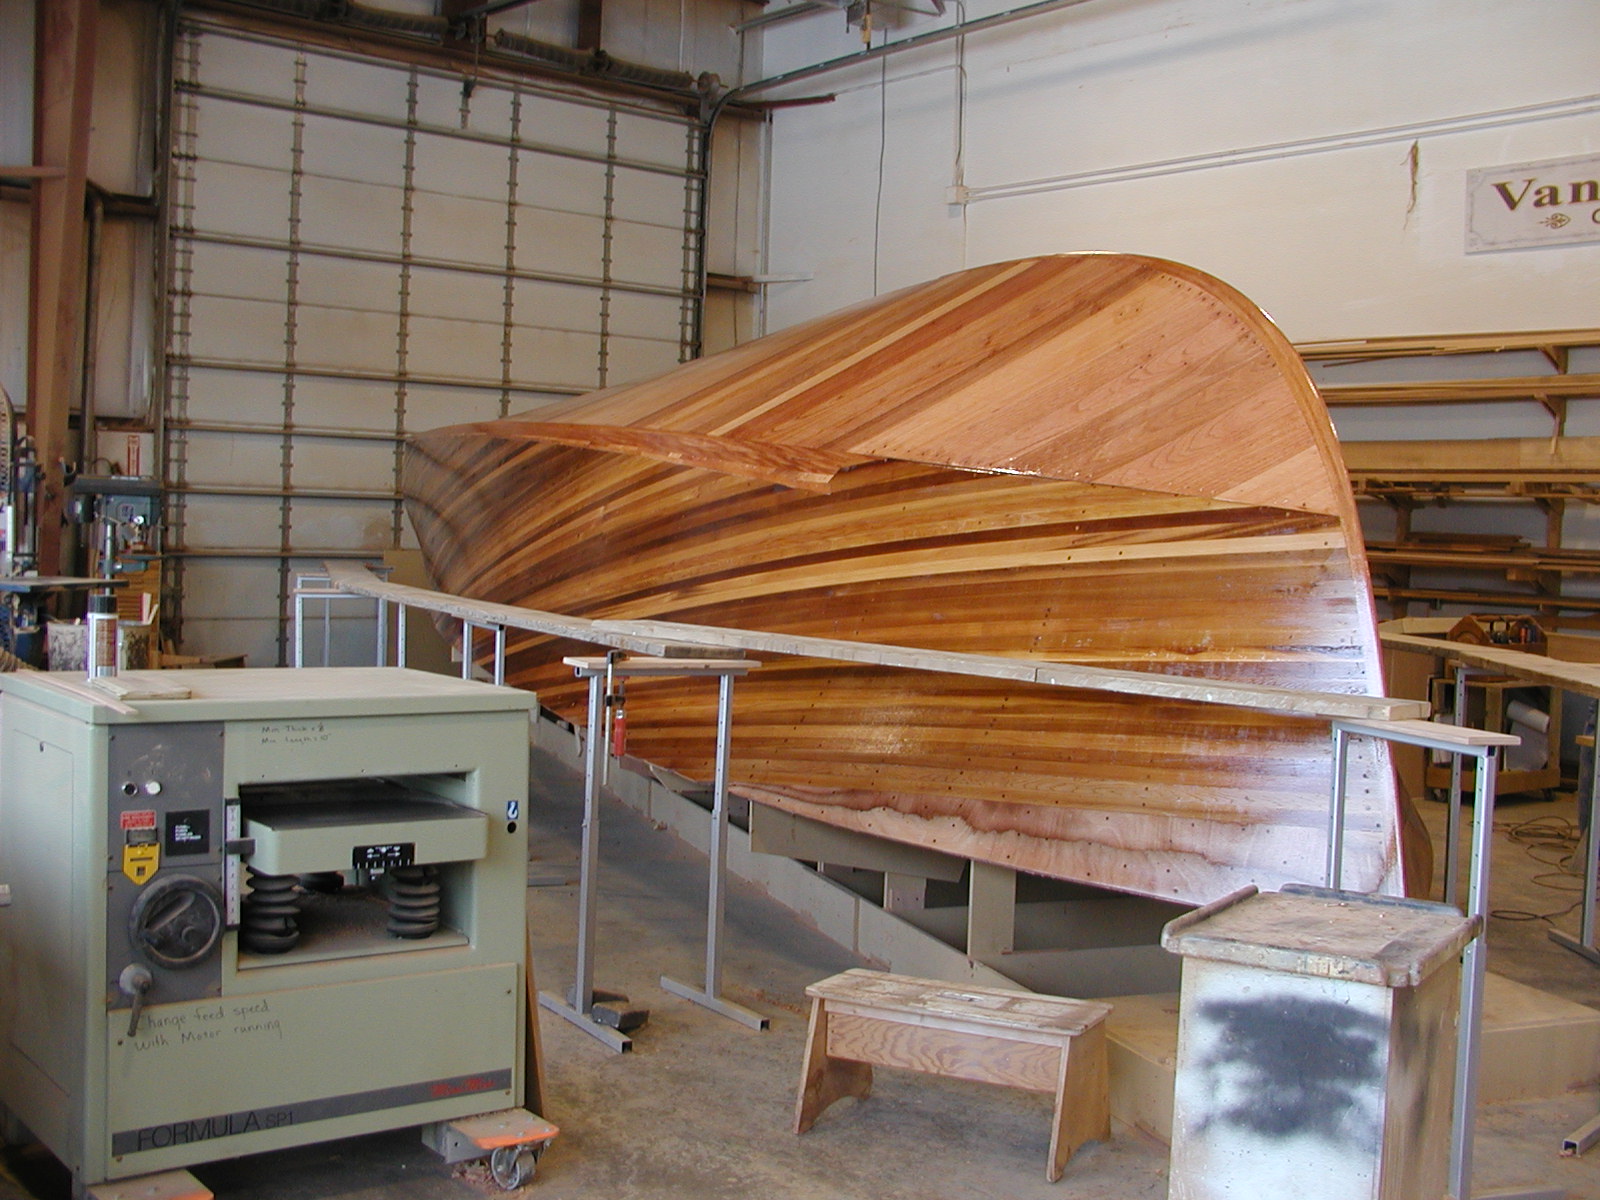 Hull planking drying on Blue Star